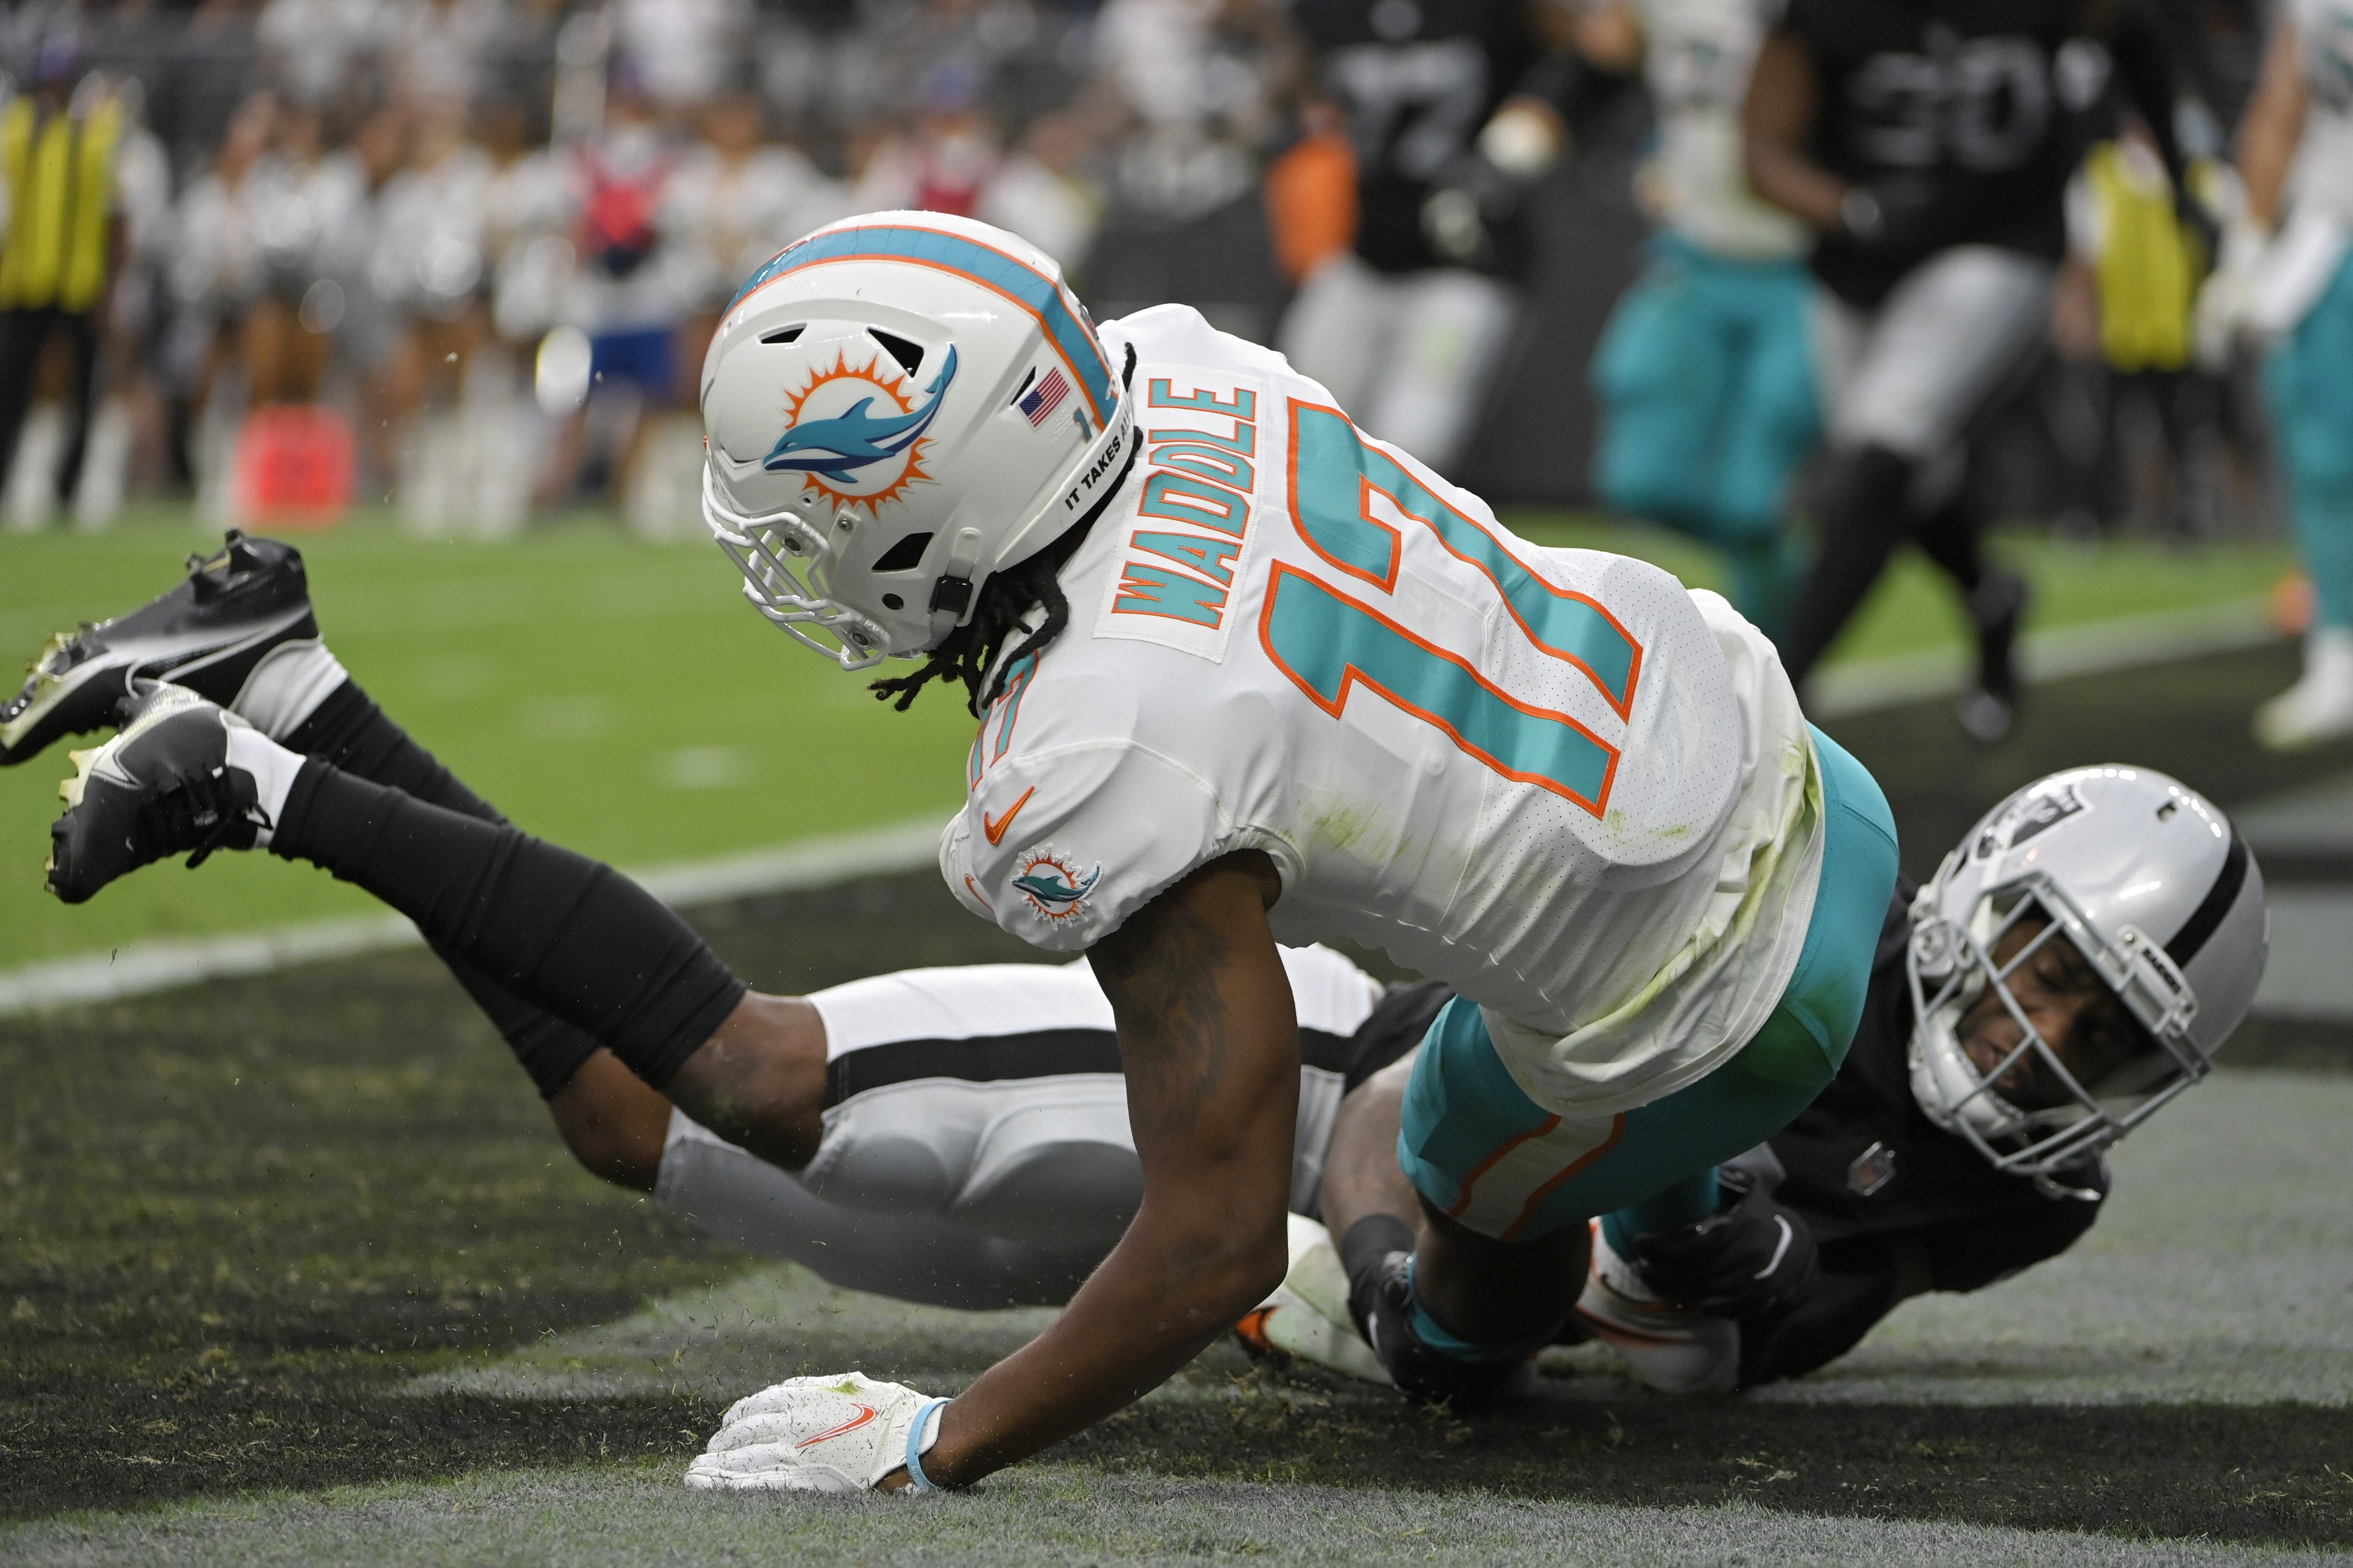 Dolphins coordinator explains bizarre play that resulted in safety vs. Raiders